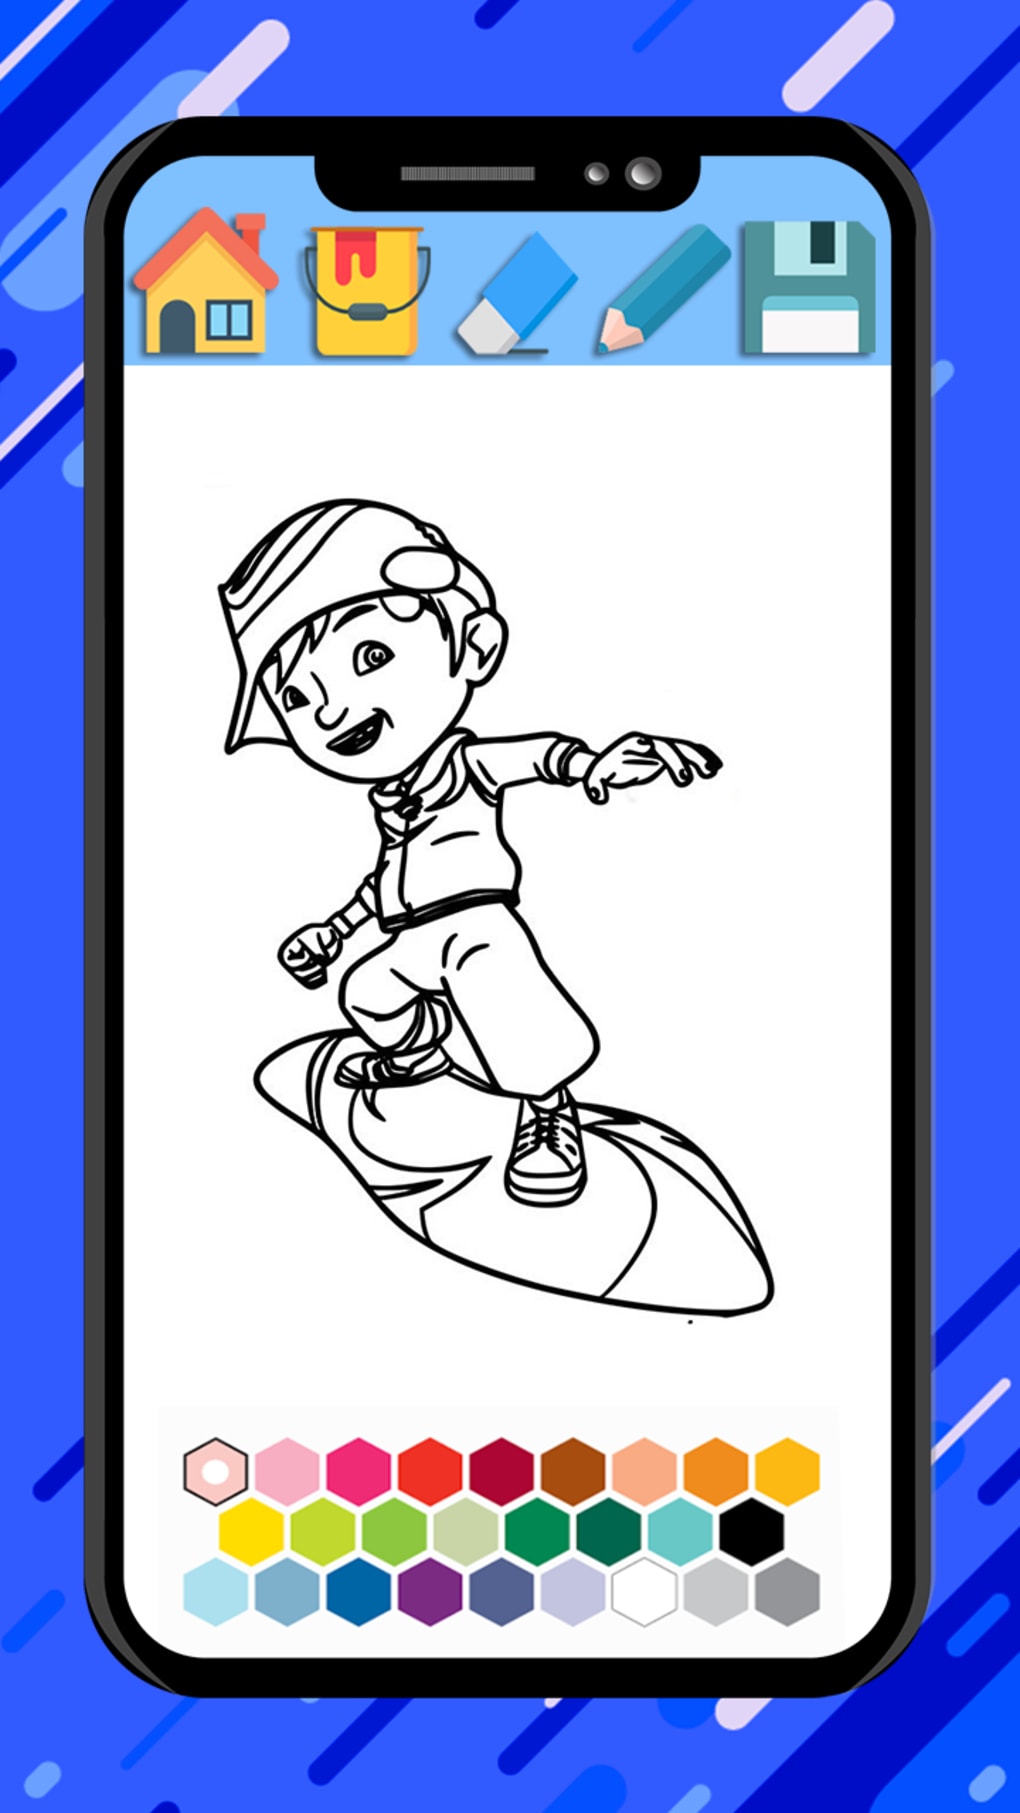 Boboiboy coloring cartoon game APK for Android   Download